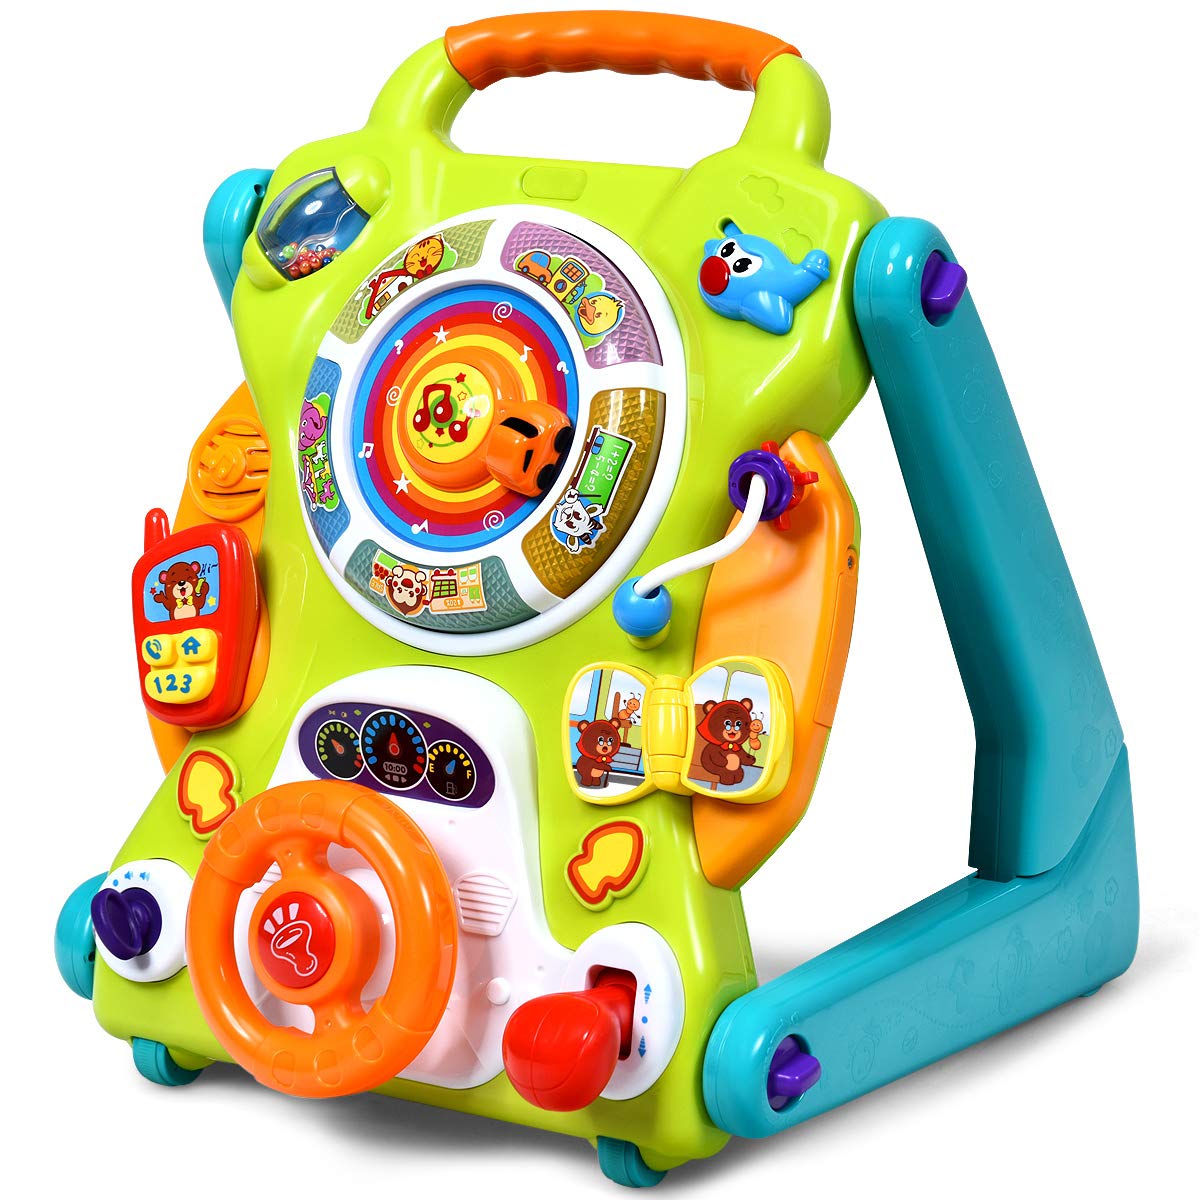 BABY JOY 3-In-1 Sit-To-Stand Educational Activity Walker